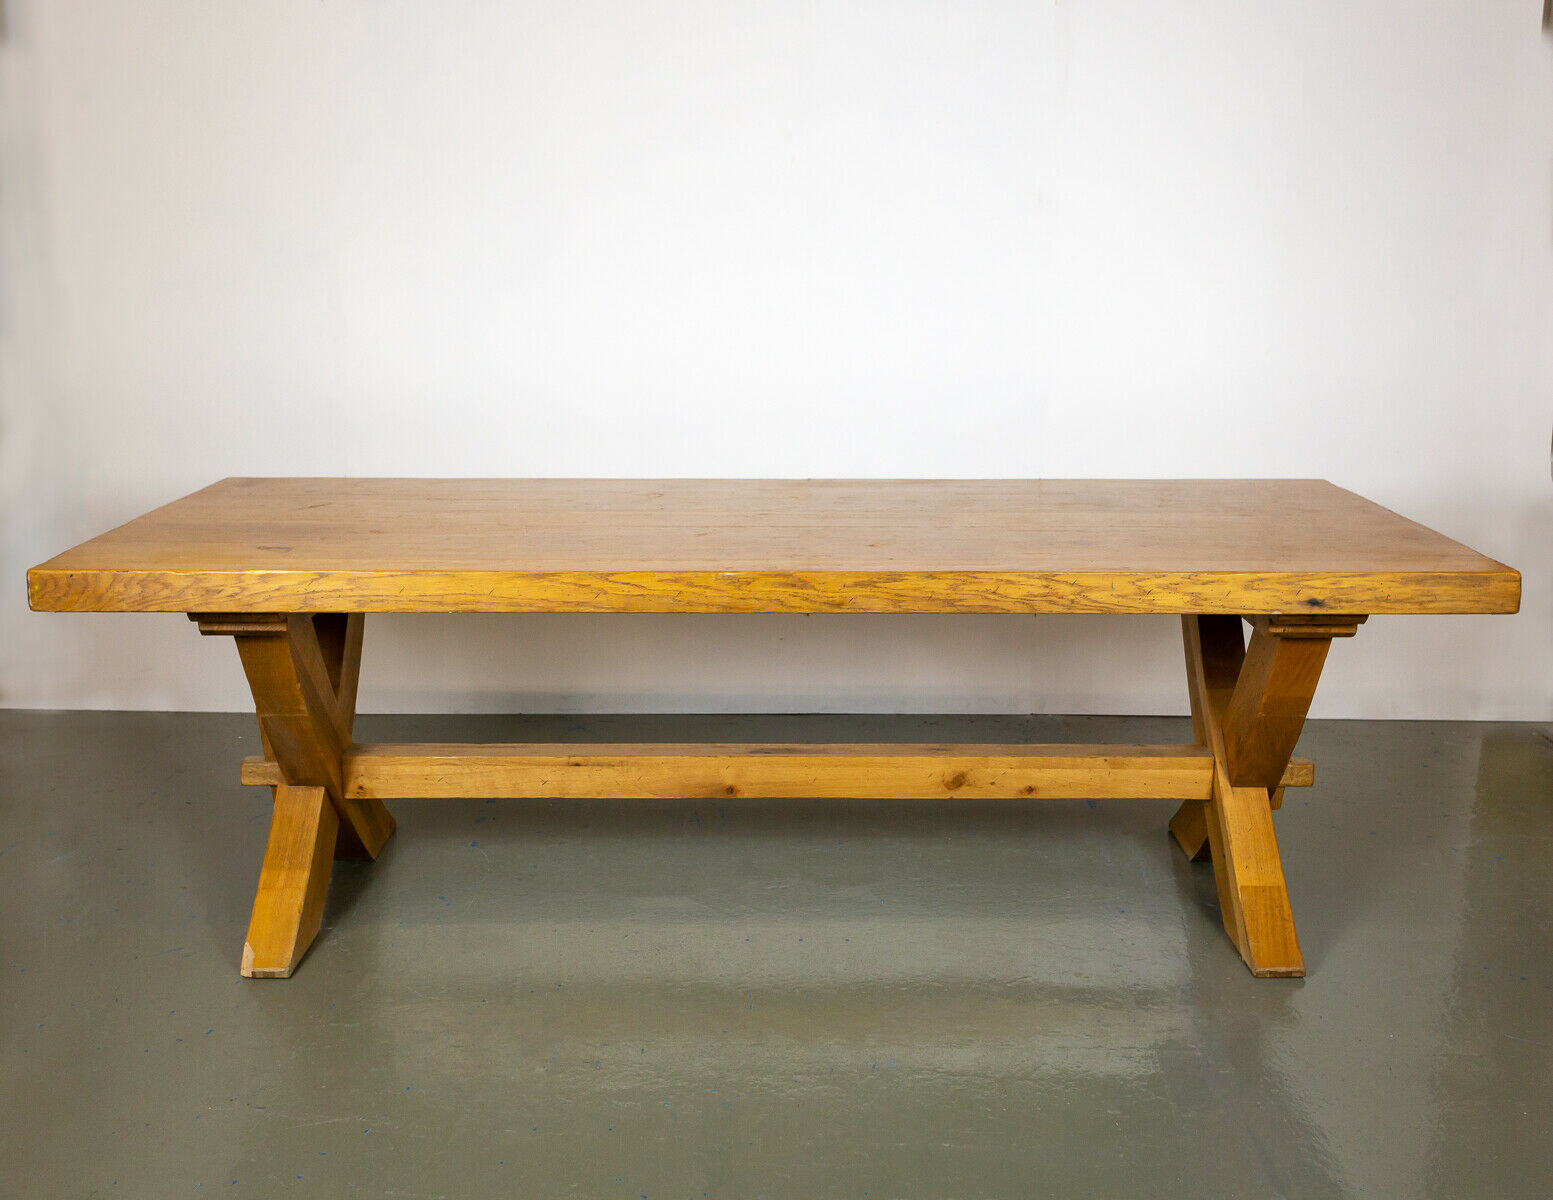 Rossiters of Bath Solid Wood Table, Chairs and Bench